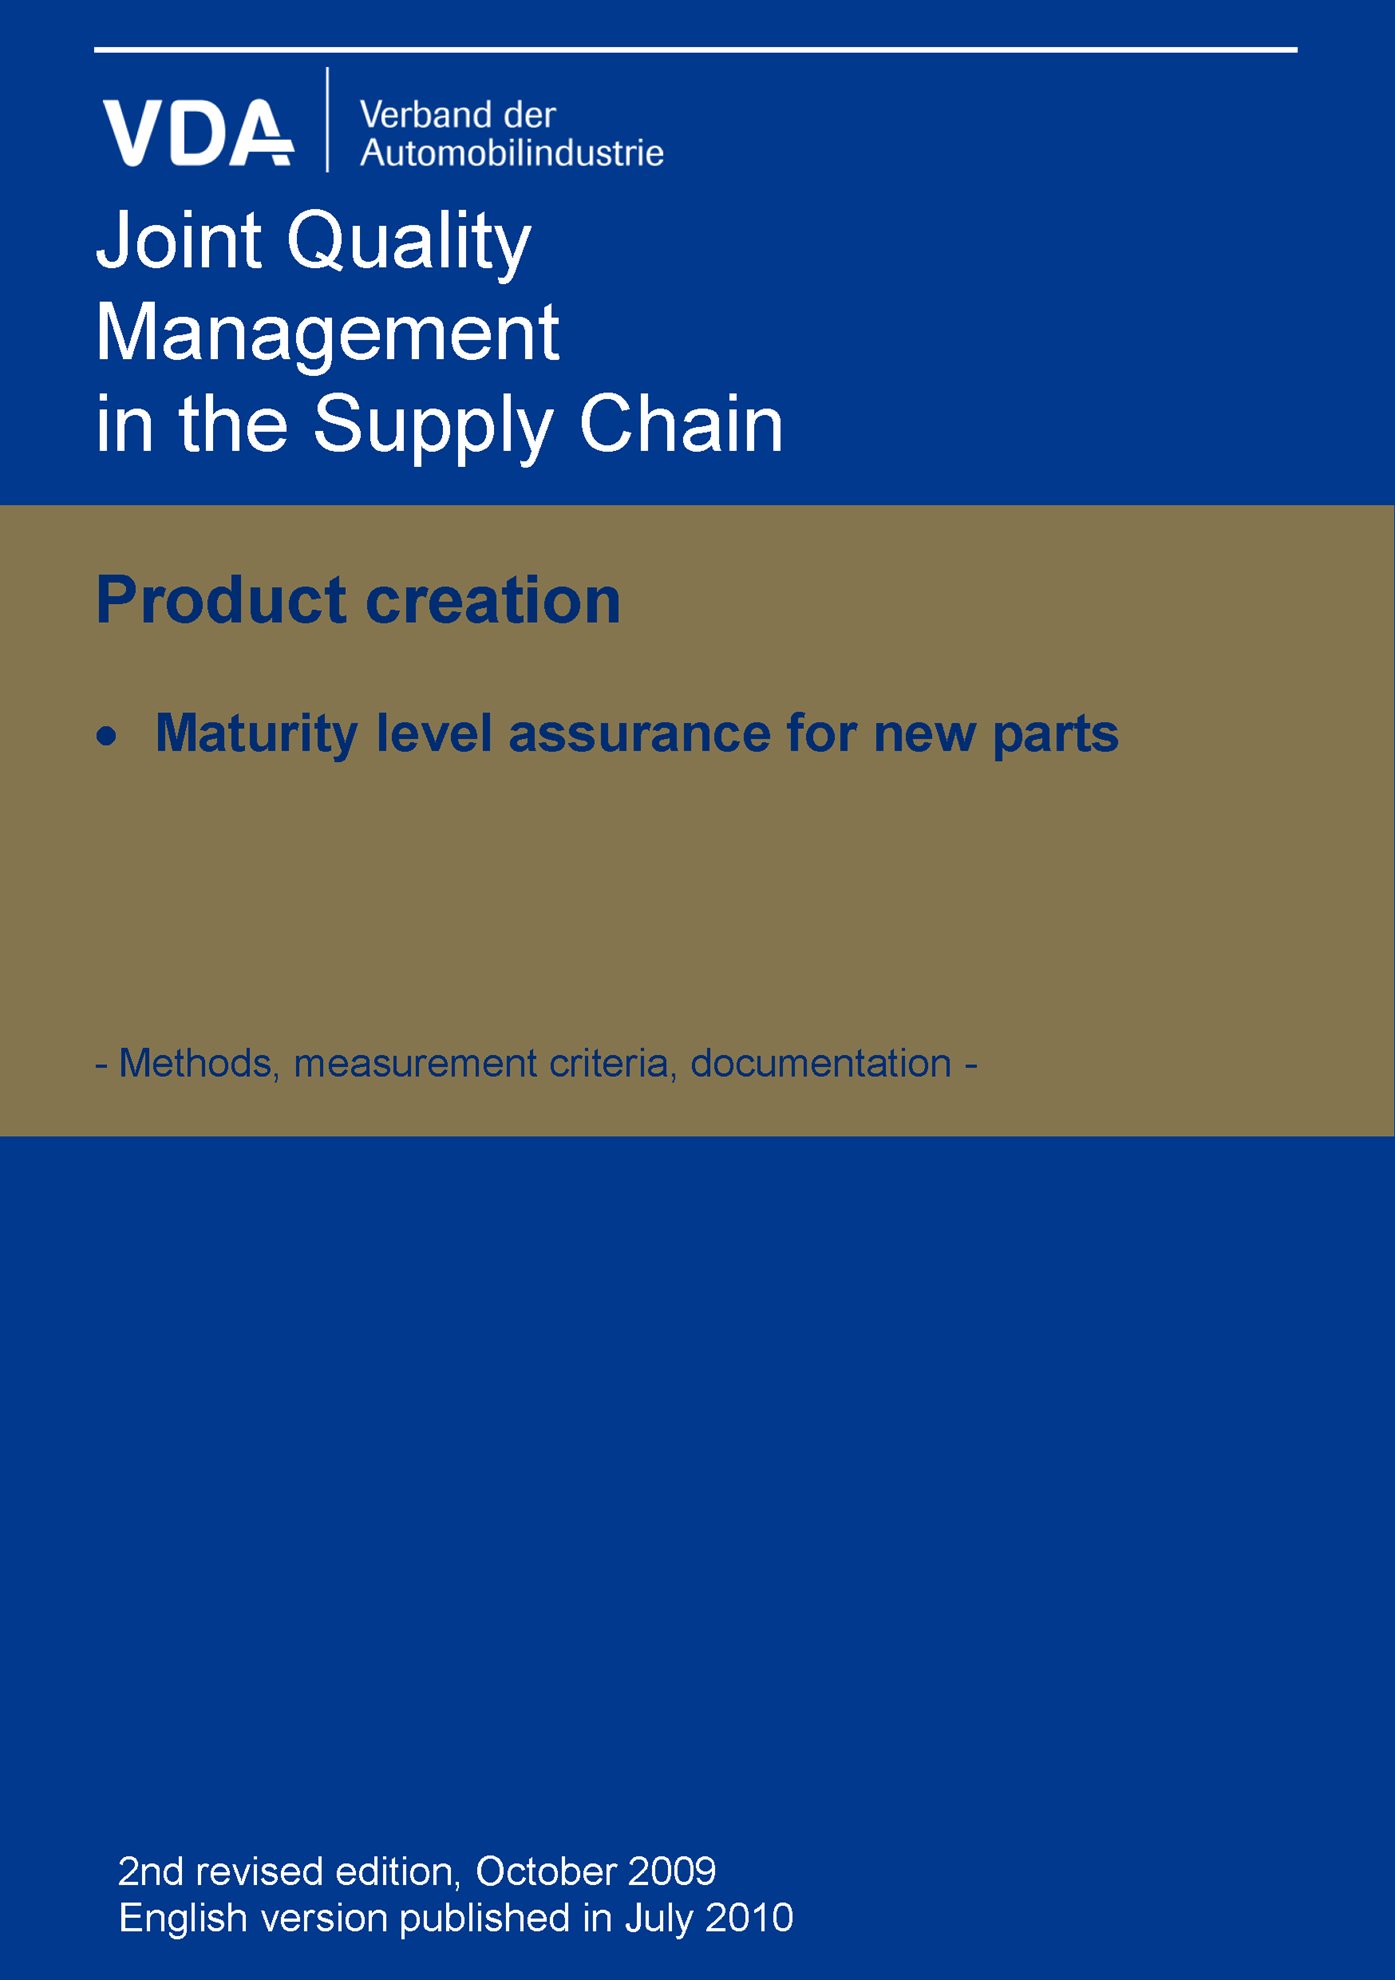 VDA Product creation - Maturity Level Assurance for new Parts - Methods, measurement criteria, documentation - 2nd revised edition, Oct. 2009 English version published in July 2010 1.1.2010